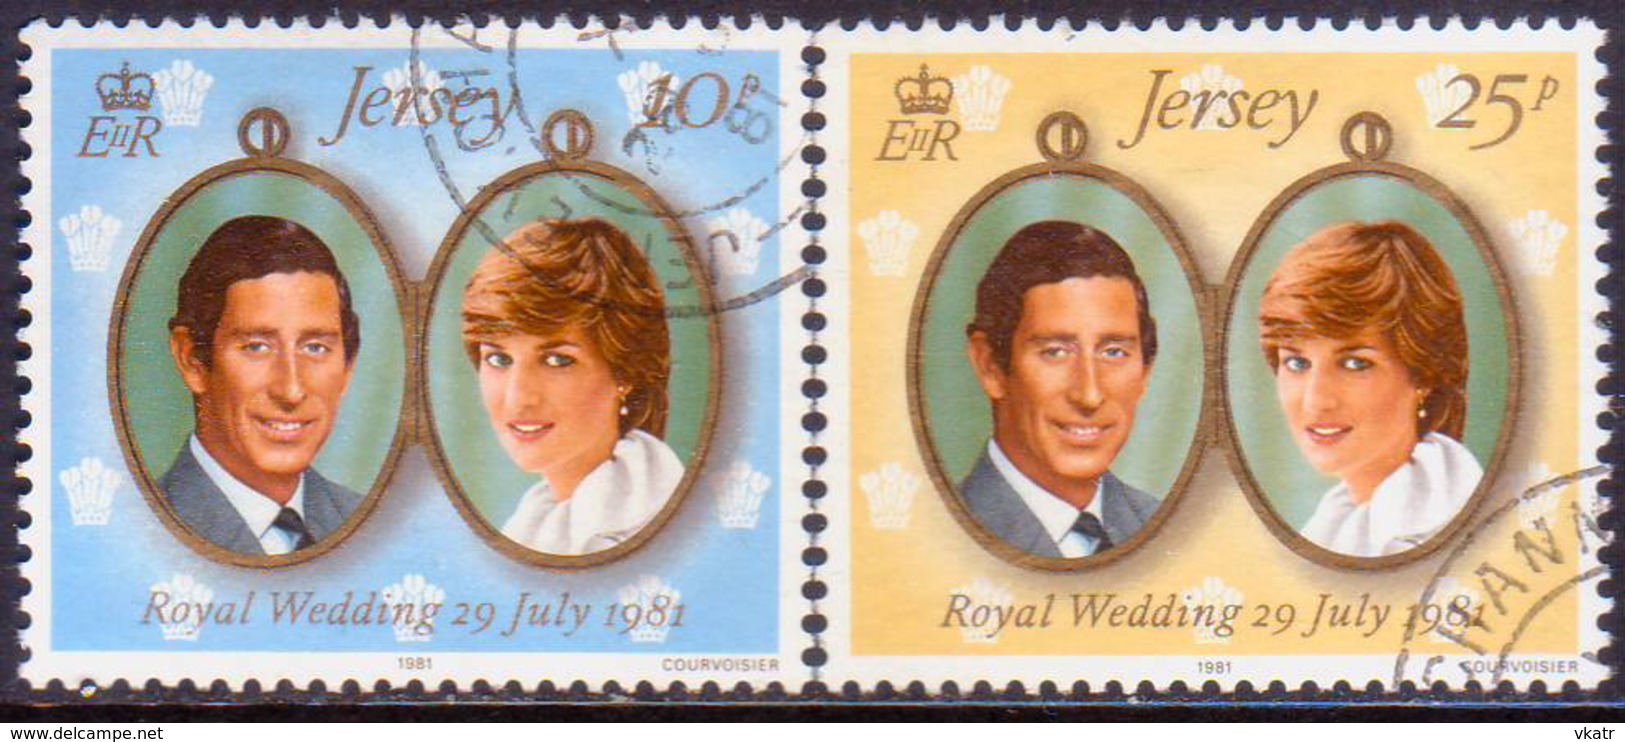 JERSEY 1981 SG #284-85 Compl.set Used Royal Wedding - Jersey